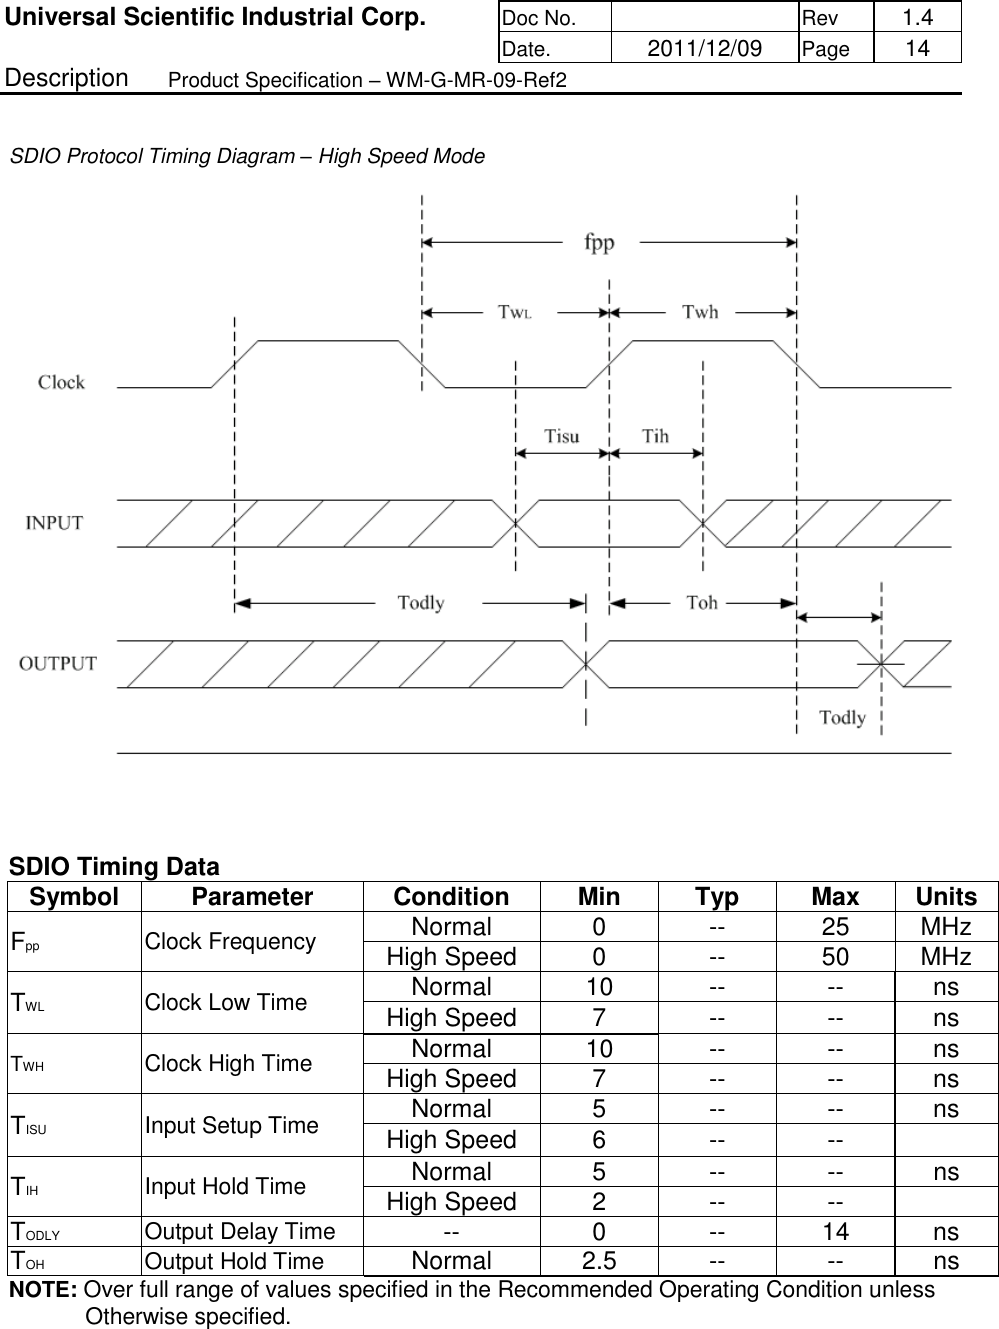 Universal Scientific Industrial Corp. Doc No.   Rev  1.4      Date.   2011/12/09 Page  14 Description   Product Specification – WM-G-MR-09-Ref2   SDIO Protocol Timing Diagram – High Speed Mode     SDIO Timing Data Symbol  Parameter  Condition   Min  Typ  Max   Units  Fpp Clock Frequency  Normal  0  -- 25  MHz High Speed  0  -- 50  MHz TWL Clock Low Time   Normal  10 -- -- ns High Speed  7  --  --  ns TWH Clock High Time   Normal  10 -- -- ns High Speed  7  -- -- ns TISU Input Setup Time  Normal  5  -- -- ns High Speed  6  -- --   TIH Input Hold Time   Normal   5  -- -- ns High Speed  2  -- --   TODLY Output Delay Time  --  0  -- 14 ns TOH Output Hold Time  Normal  2.5  -- -- ns NOTE: Over full range of values specified in the Recommended Operating Condition unless              Otherwise specified.    